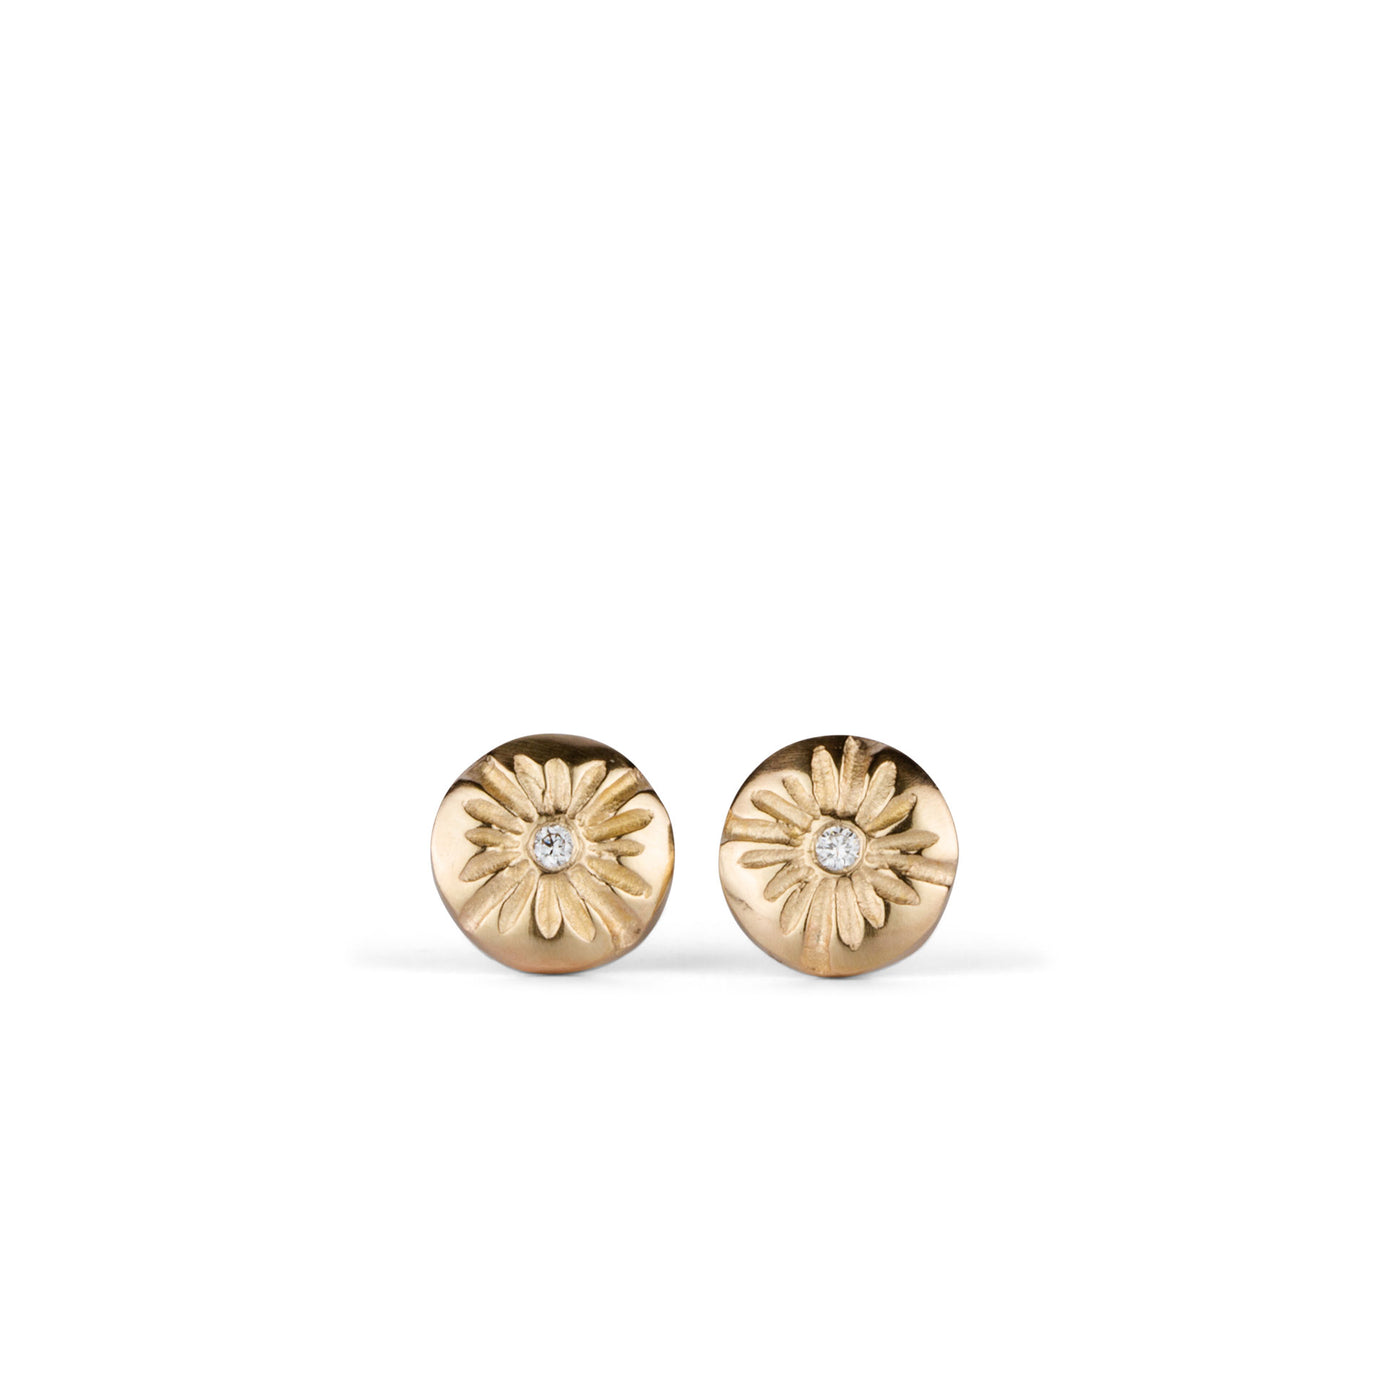 Small round carved sunburst stud earrings with diamond centers in gold on a white background